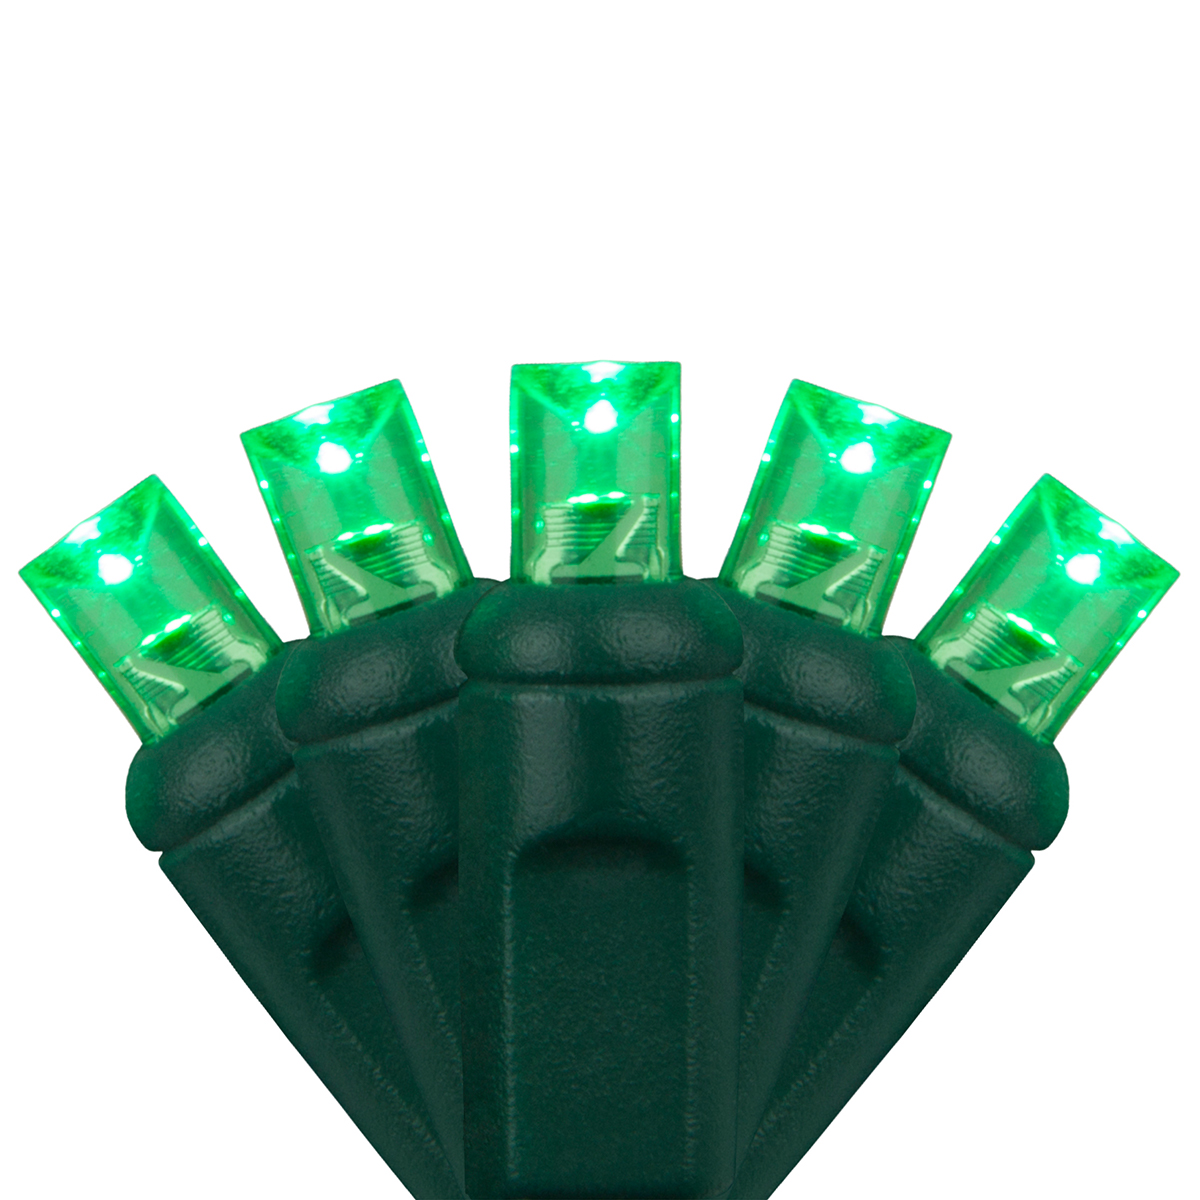 70 Green LED Christmas Lights, Long Life, Outdoor String Lights, Connectable, St. Patricks Day, Halloween, Christmas, Holidays, Party, Decoration, 24' Length, 4" Spacing - image 3 of 7